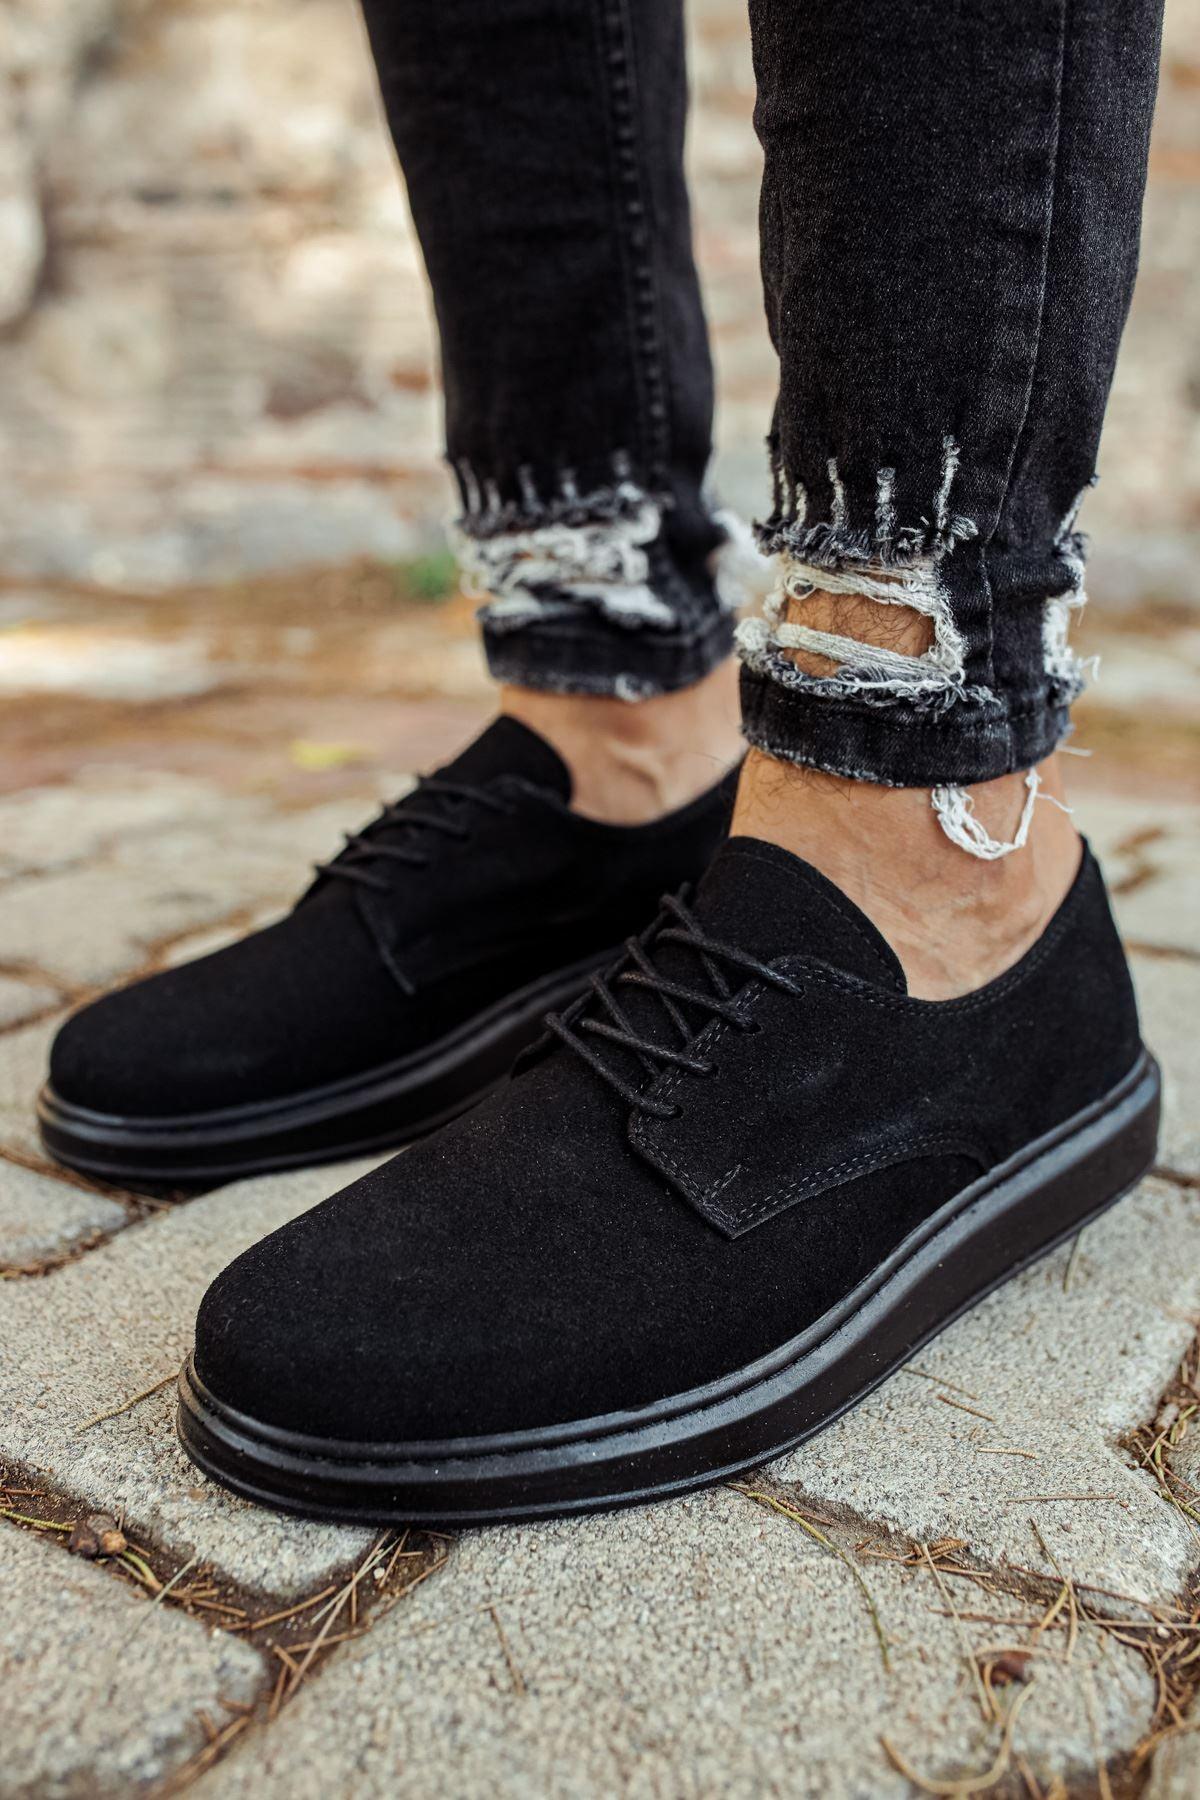 CH003 Men's Full Black Suede Classic Shoes - STREET MODE ™